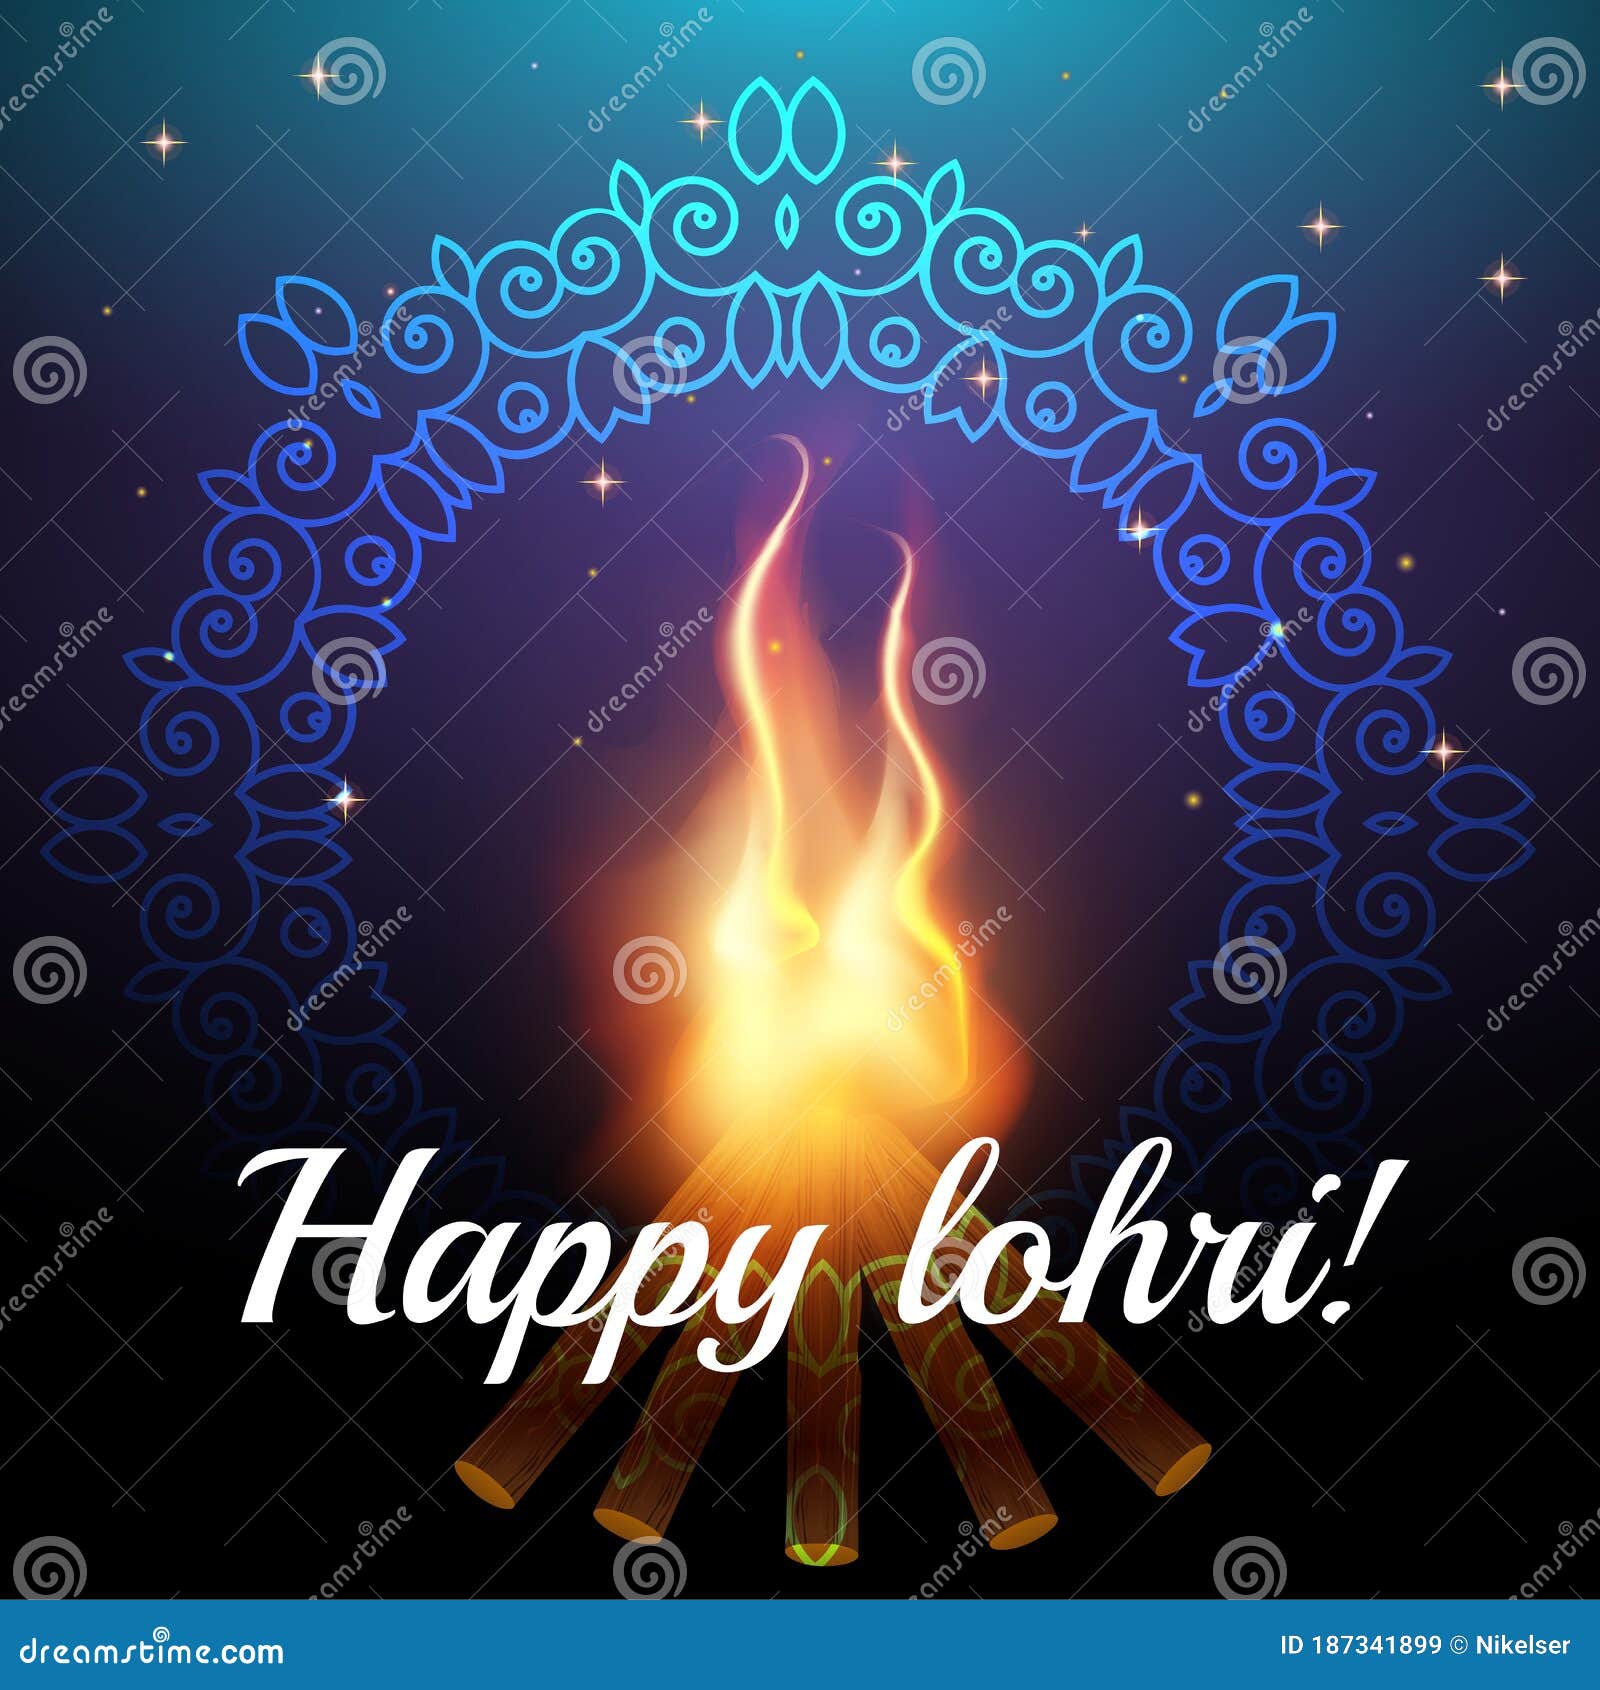 Happy Lohri Celebration Background with Bonfire and Stars Night Sky with  Ornament. Creative Poster Stock Vector - Illustration of happy,  agricultural: 187341899